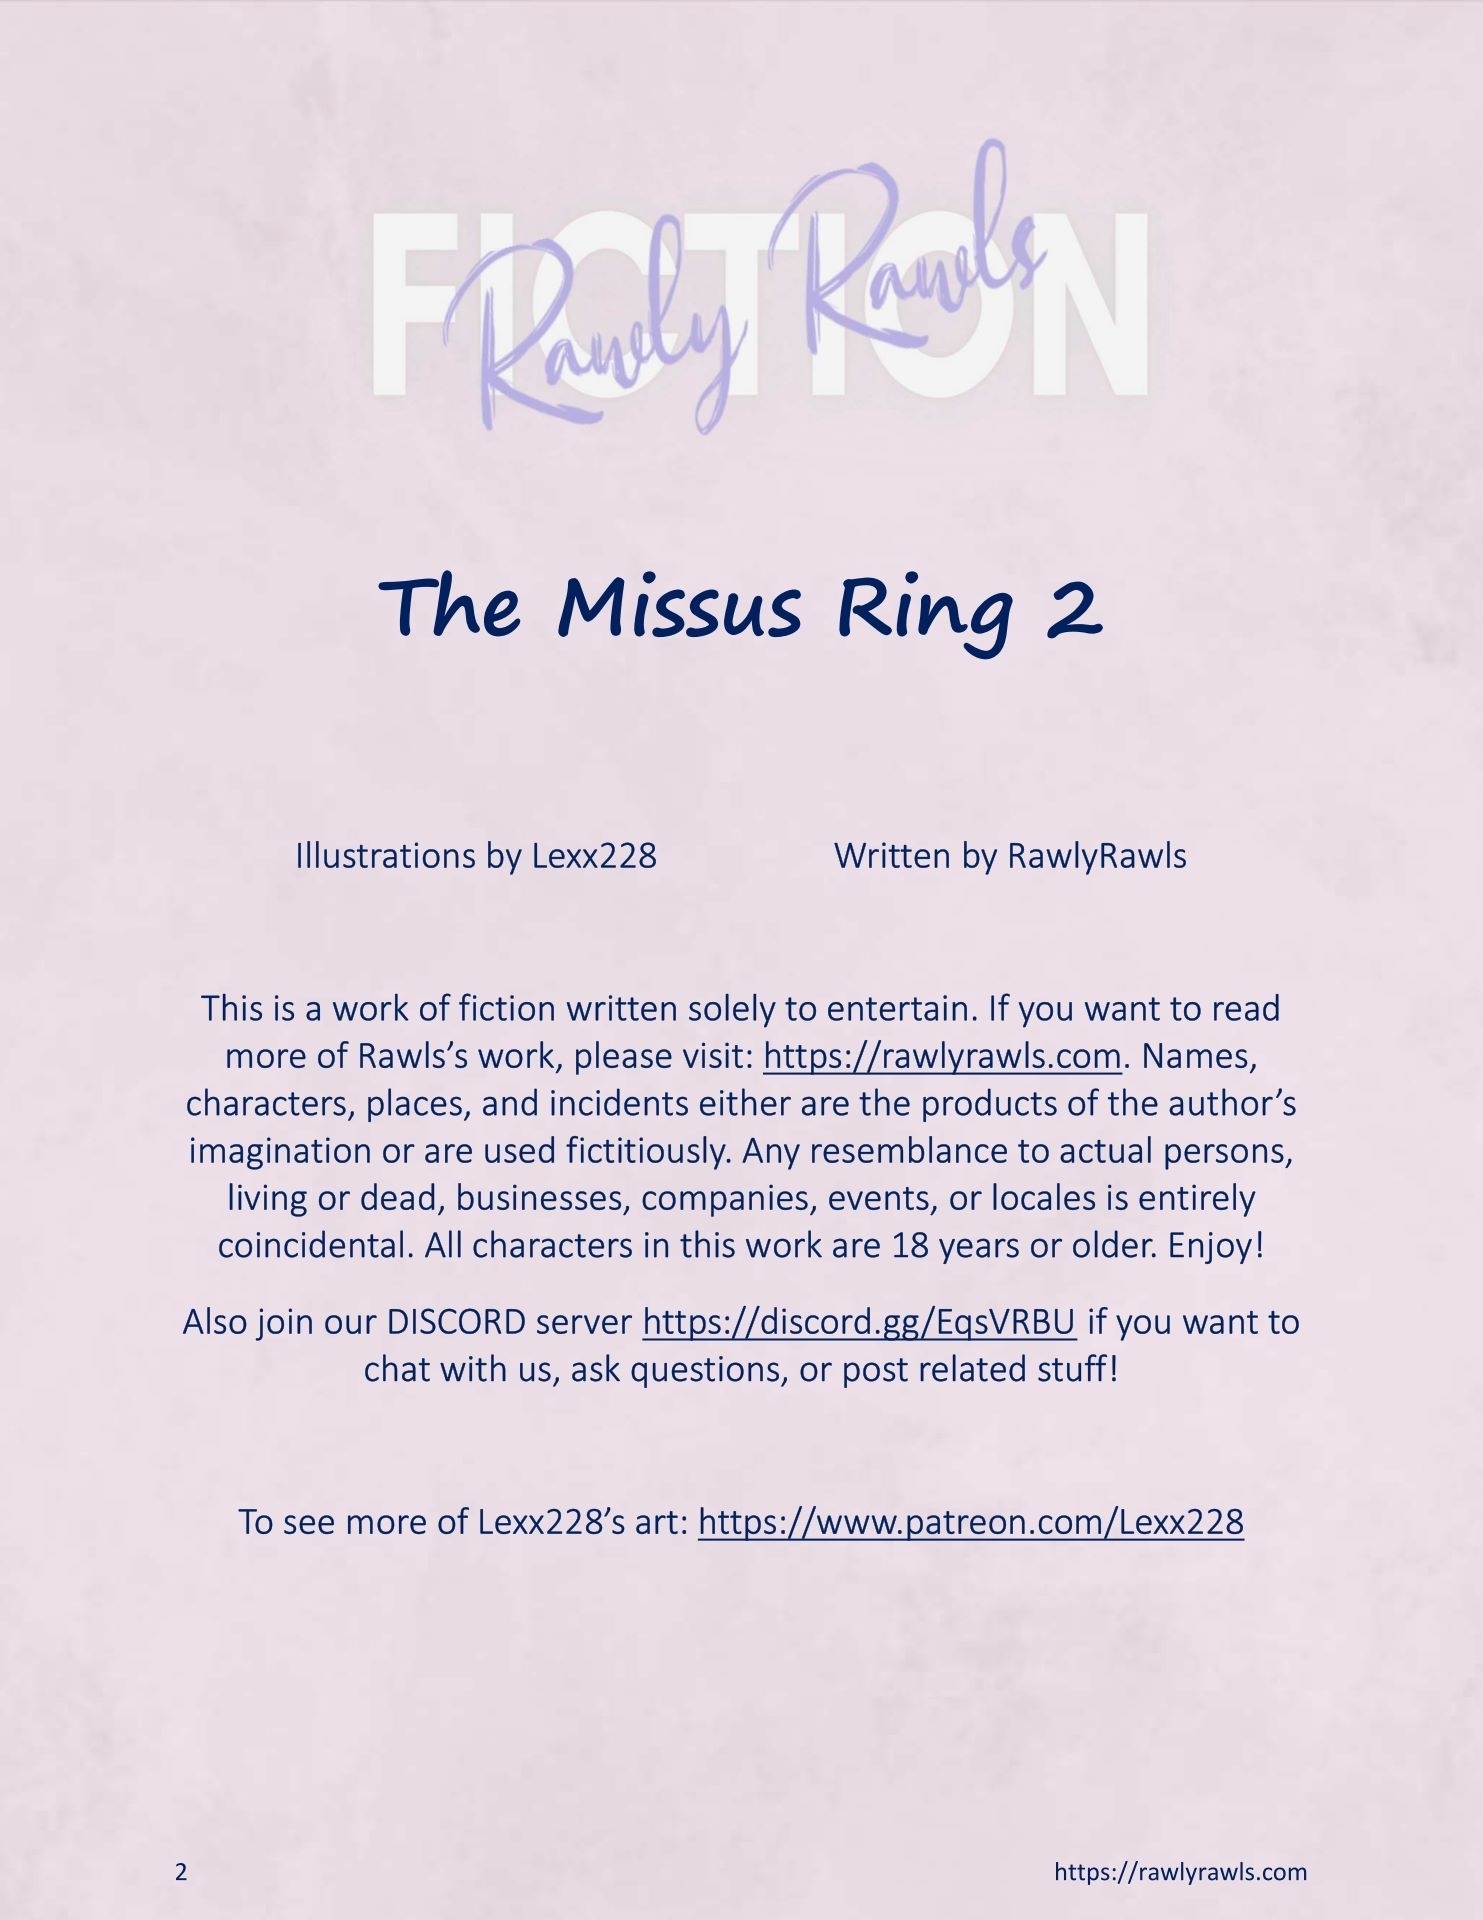 The missus ring 2￼